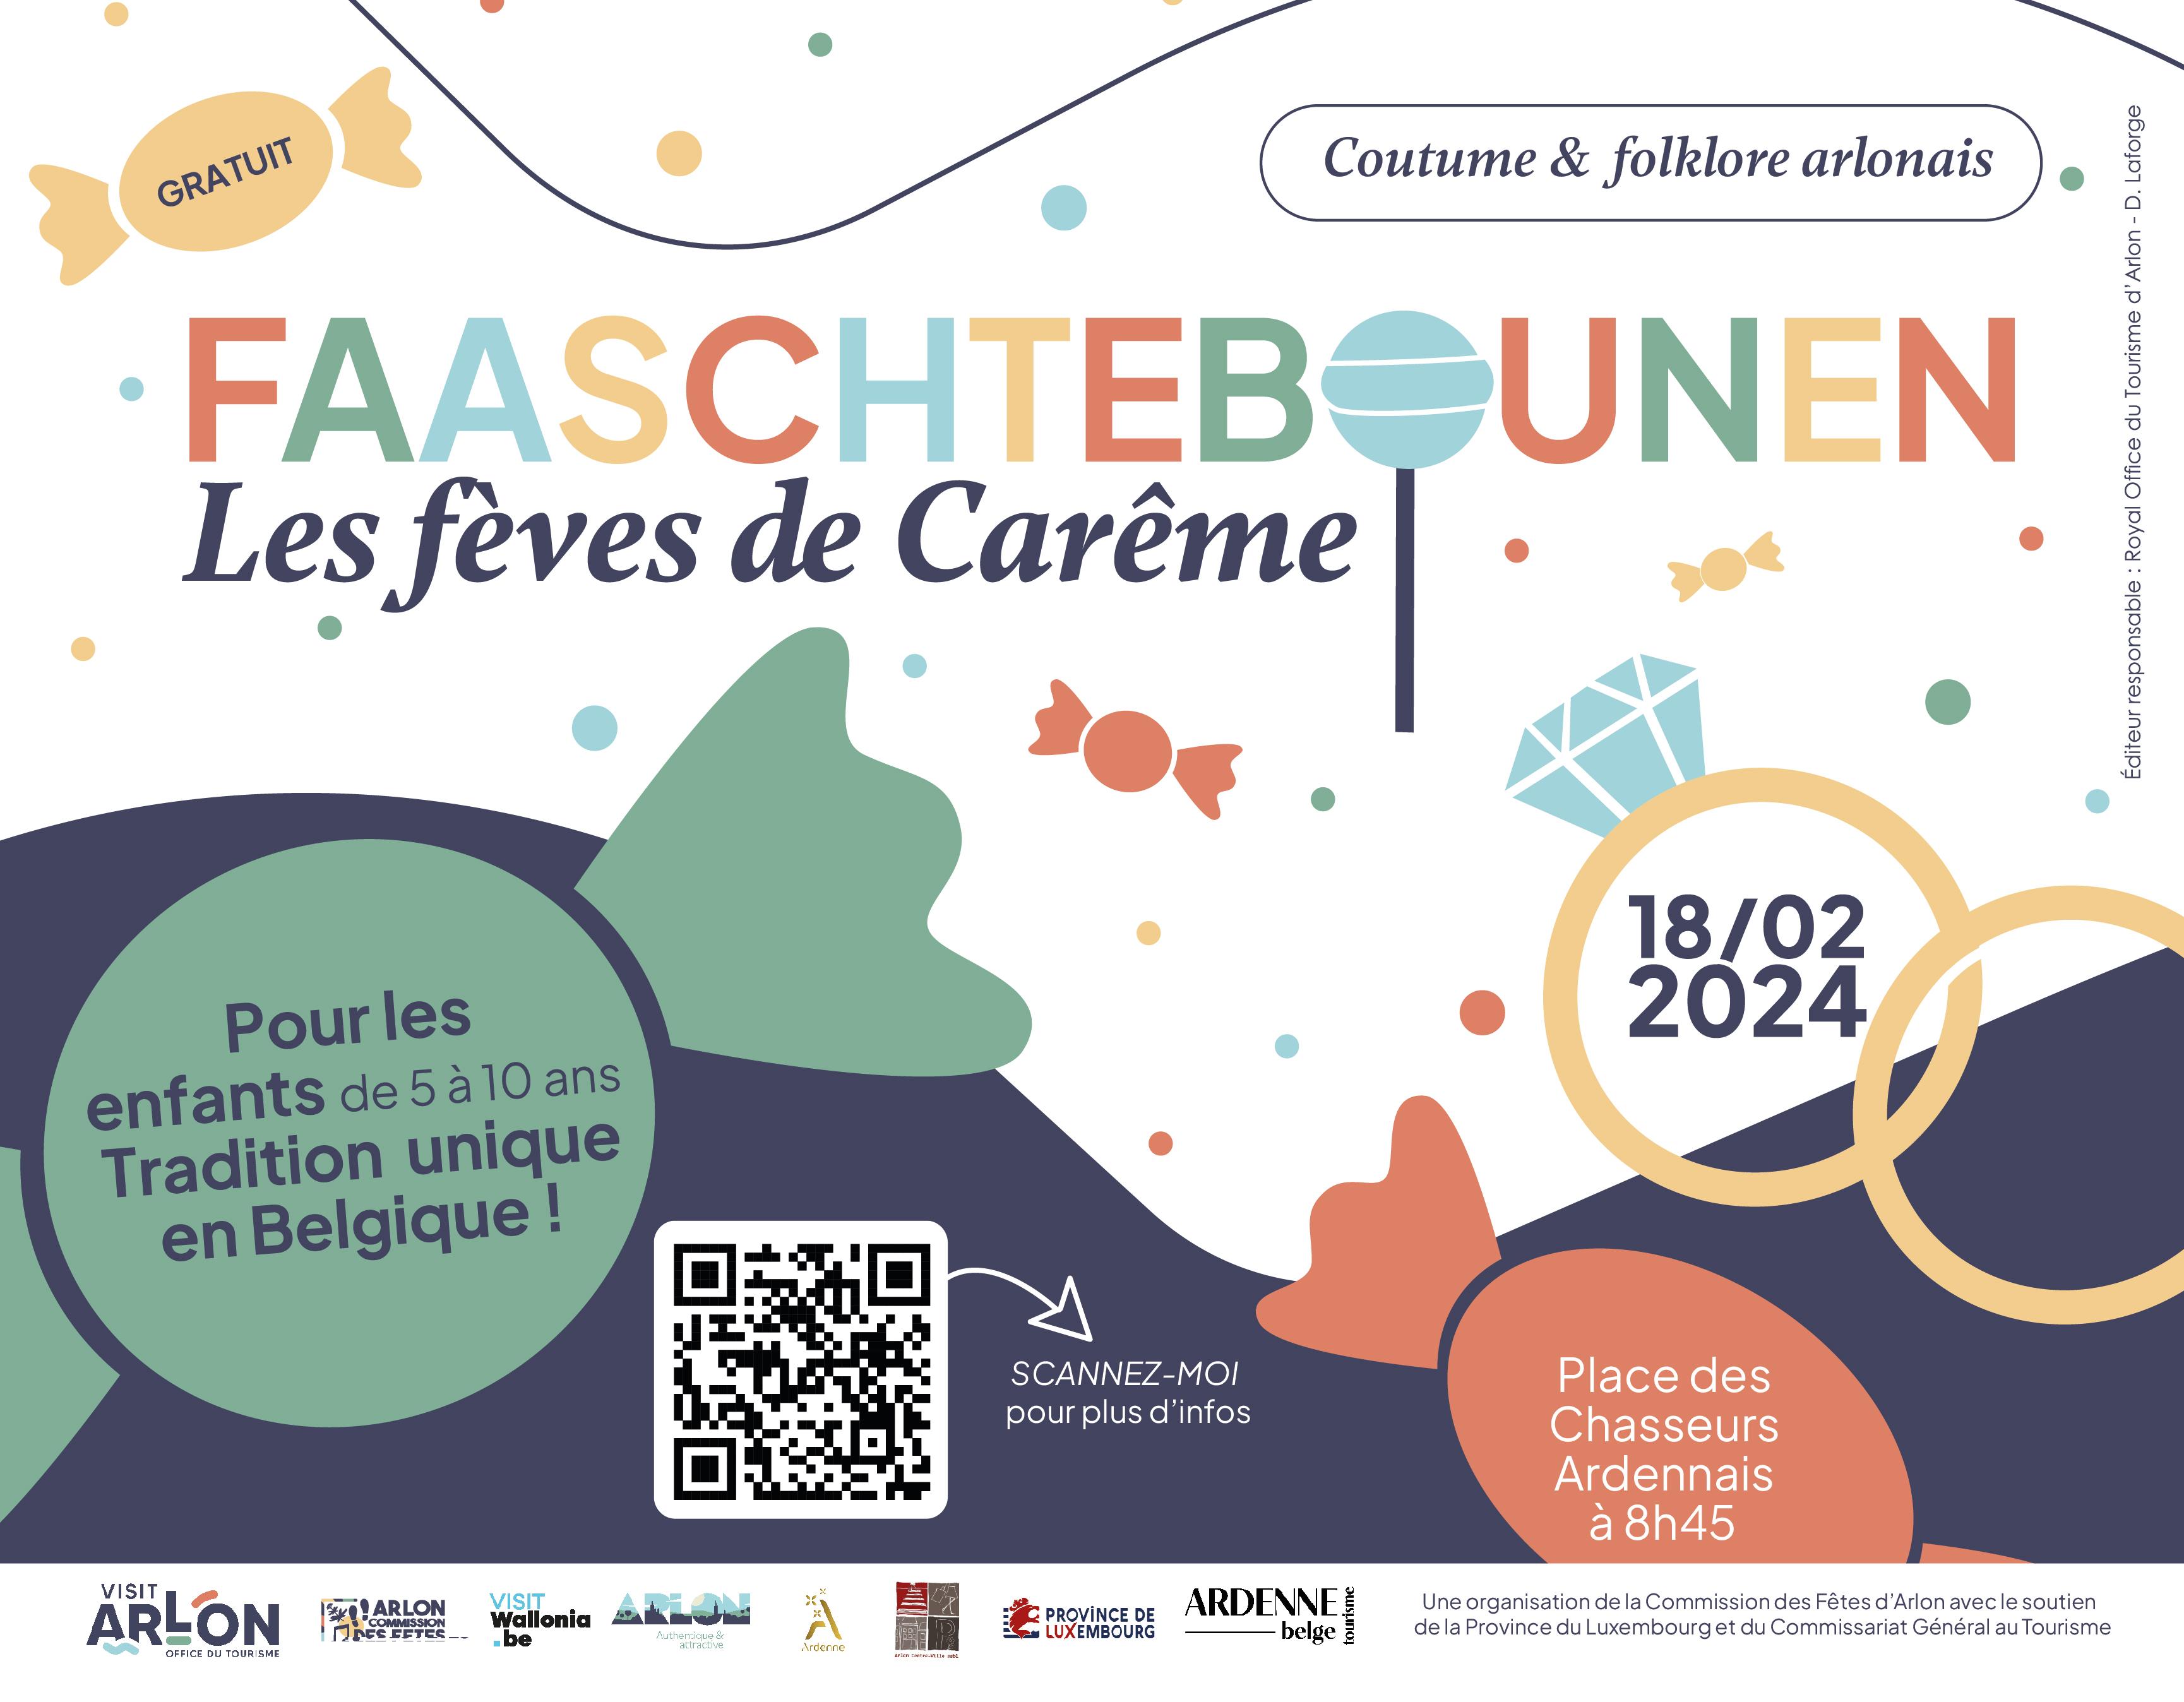 Calendrier Ardenne 2024